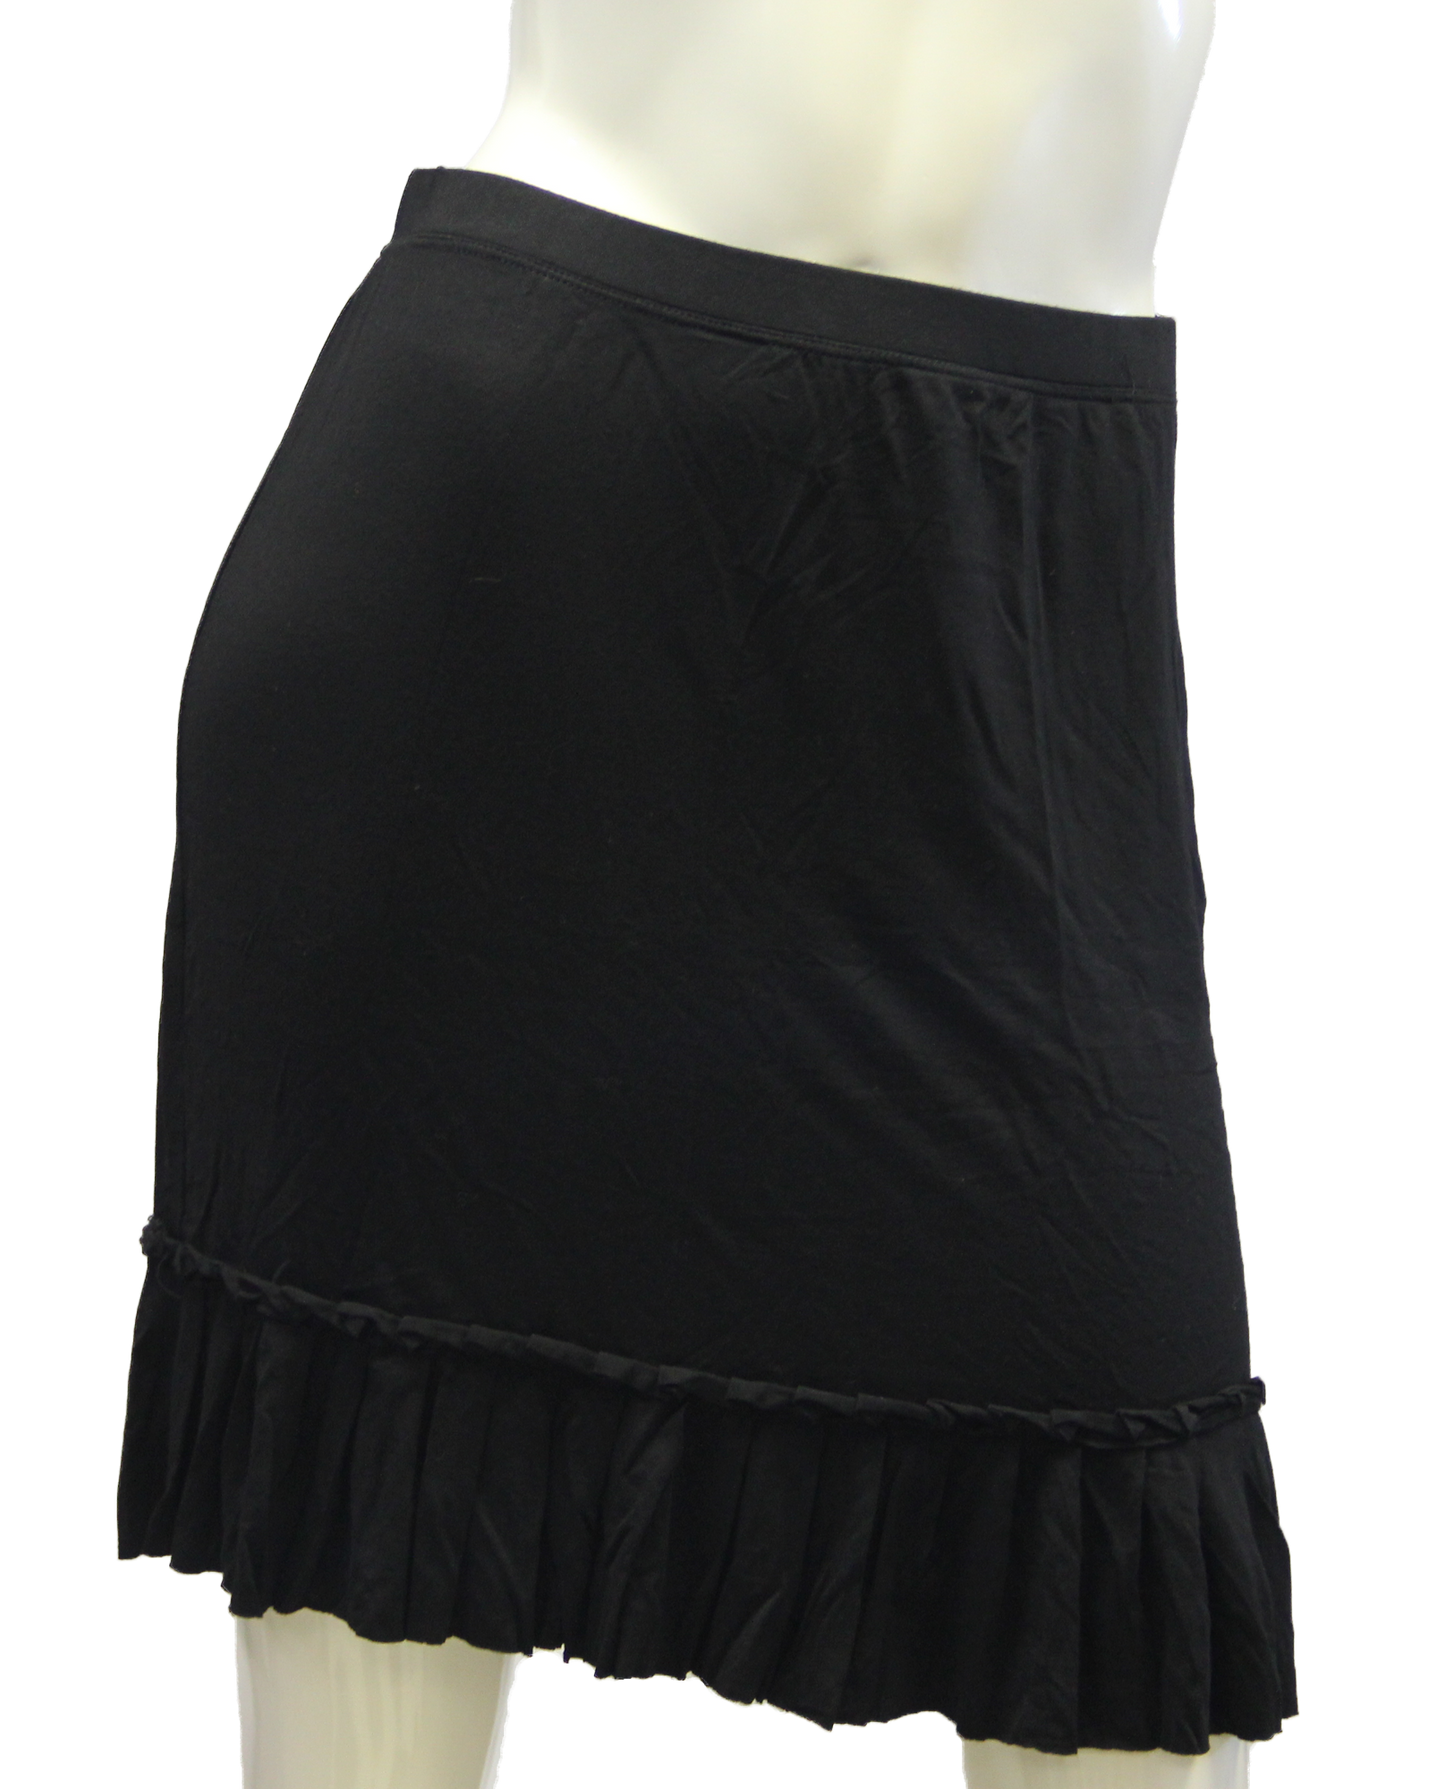 Max Studio Black Skirt with Ruffle Bottom Size Small (SKU 000028) - Designers On A Dime - 1